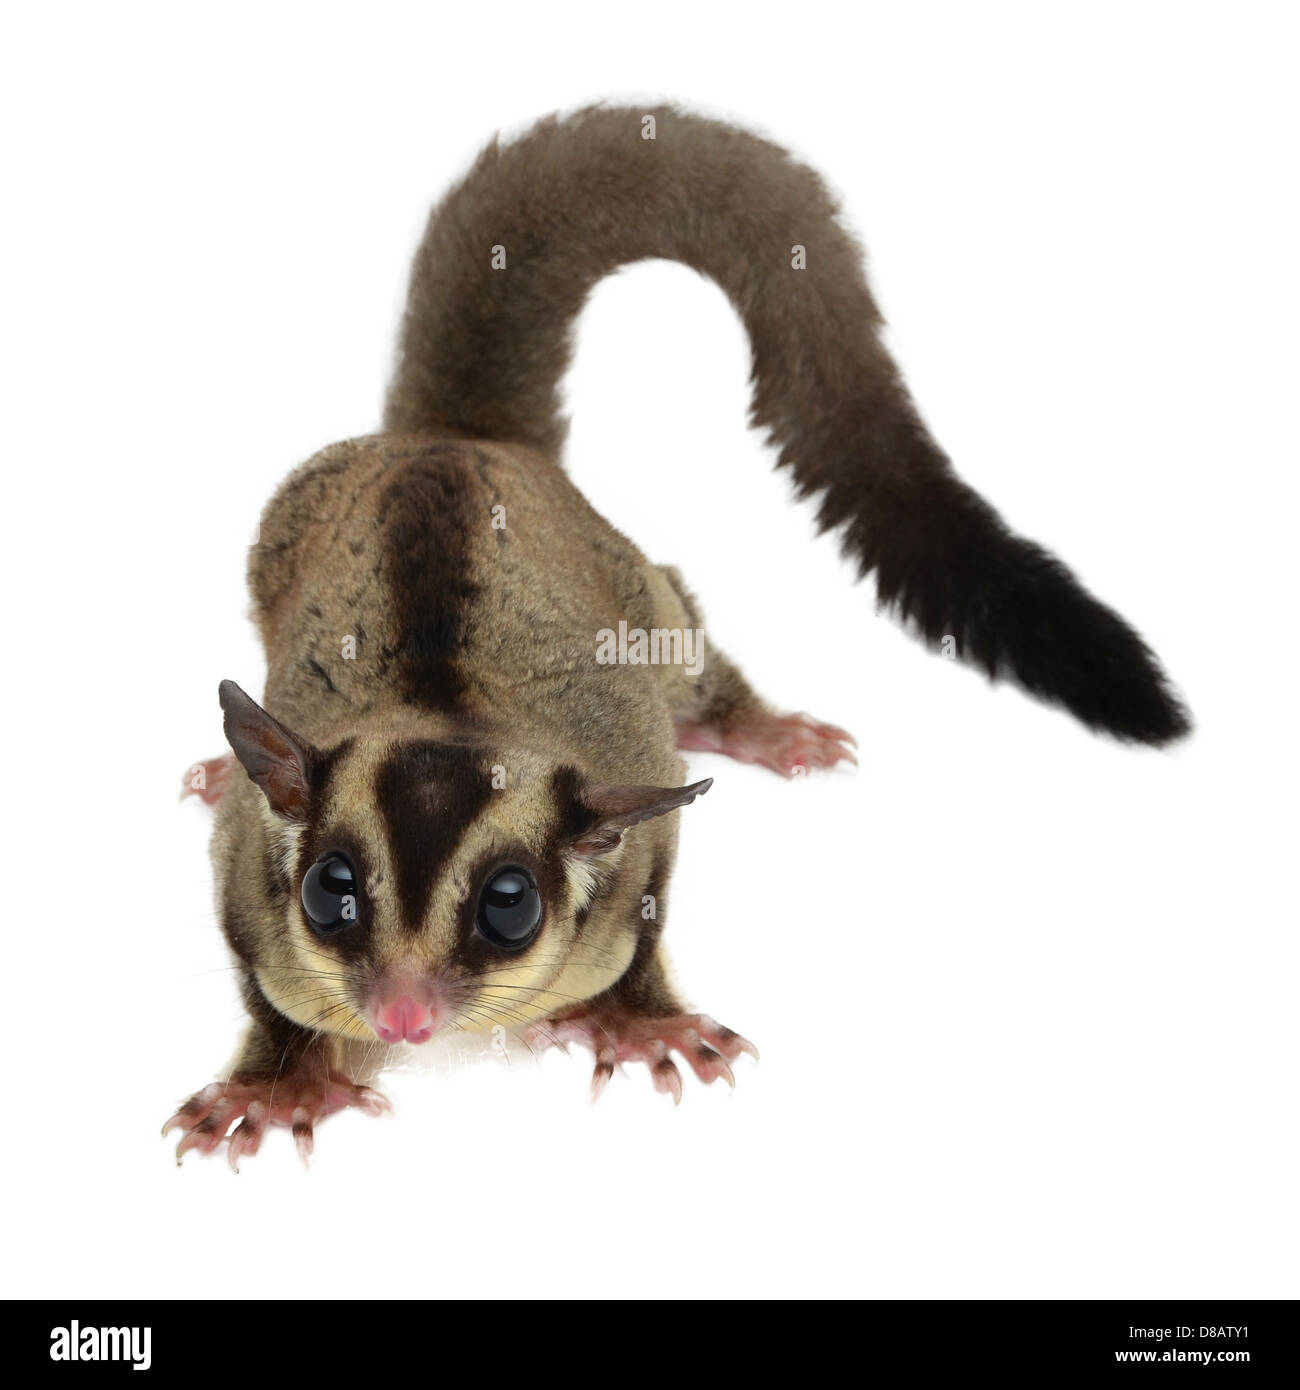 Flying squirrel, Sugarglider Stock Photo